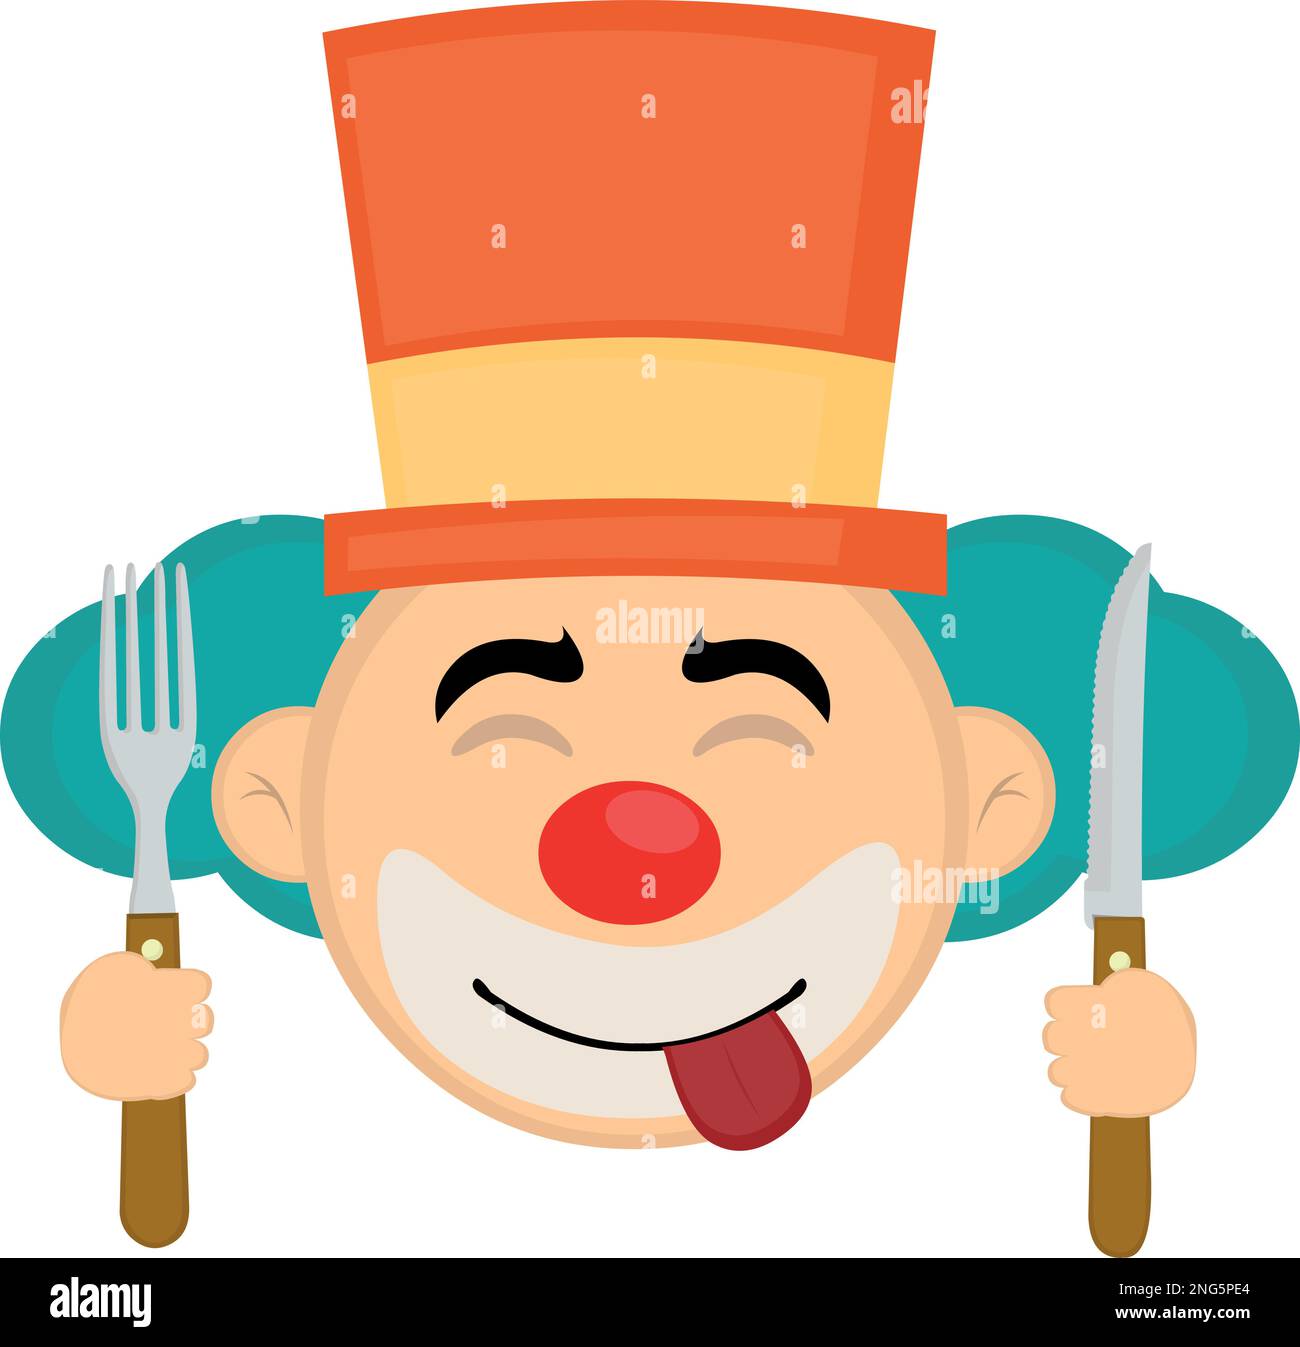 vector illustration face of a cartoon clown with an expression of yummy that delicious, with a knife and fork in his hands Stock Vector